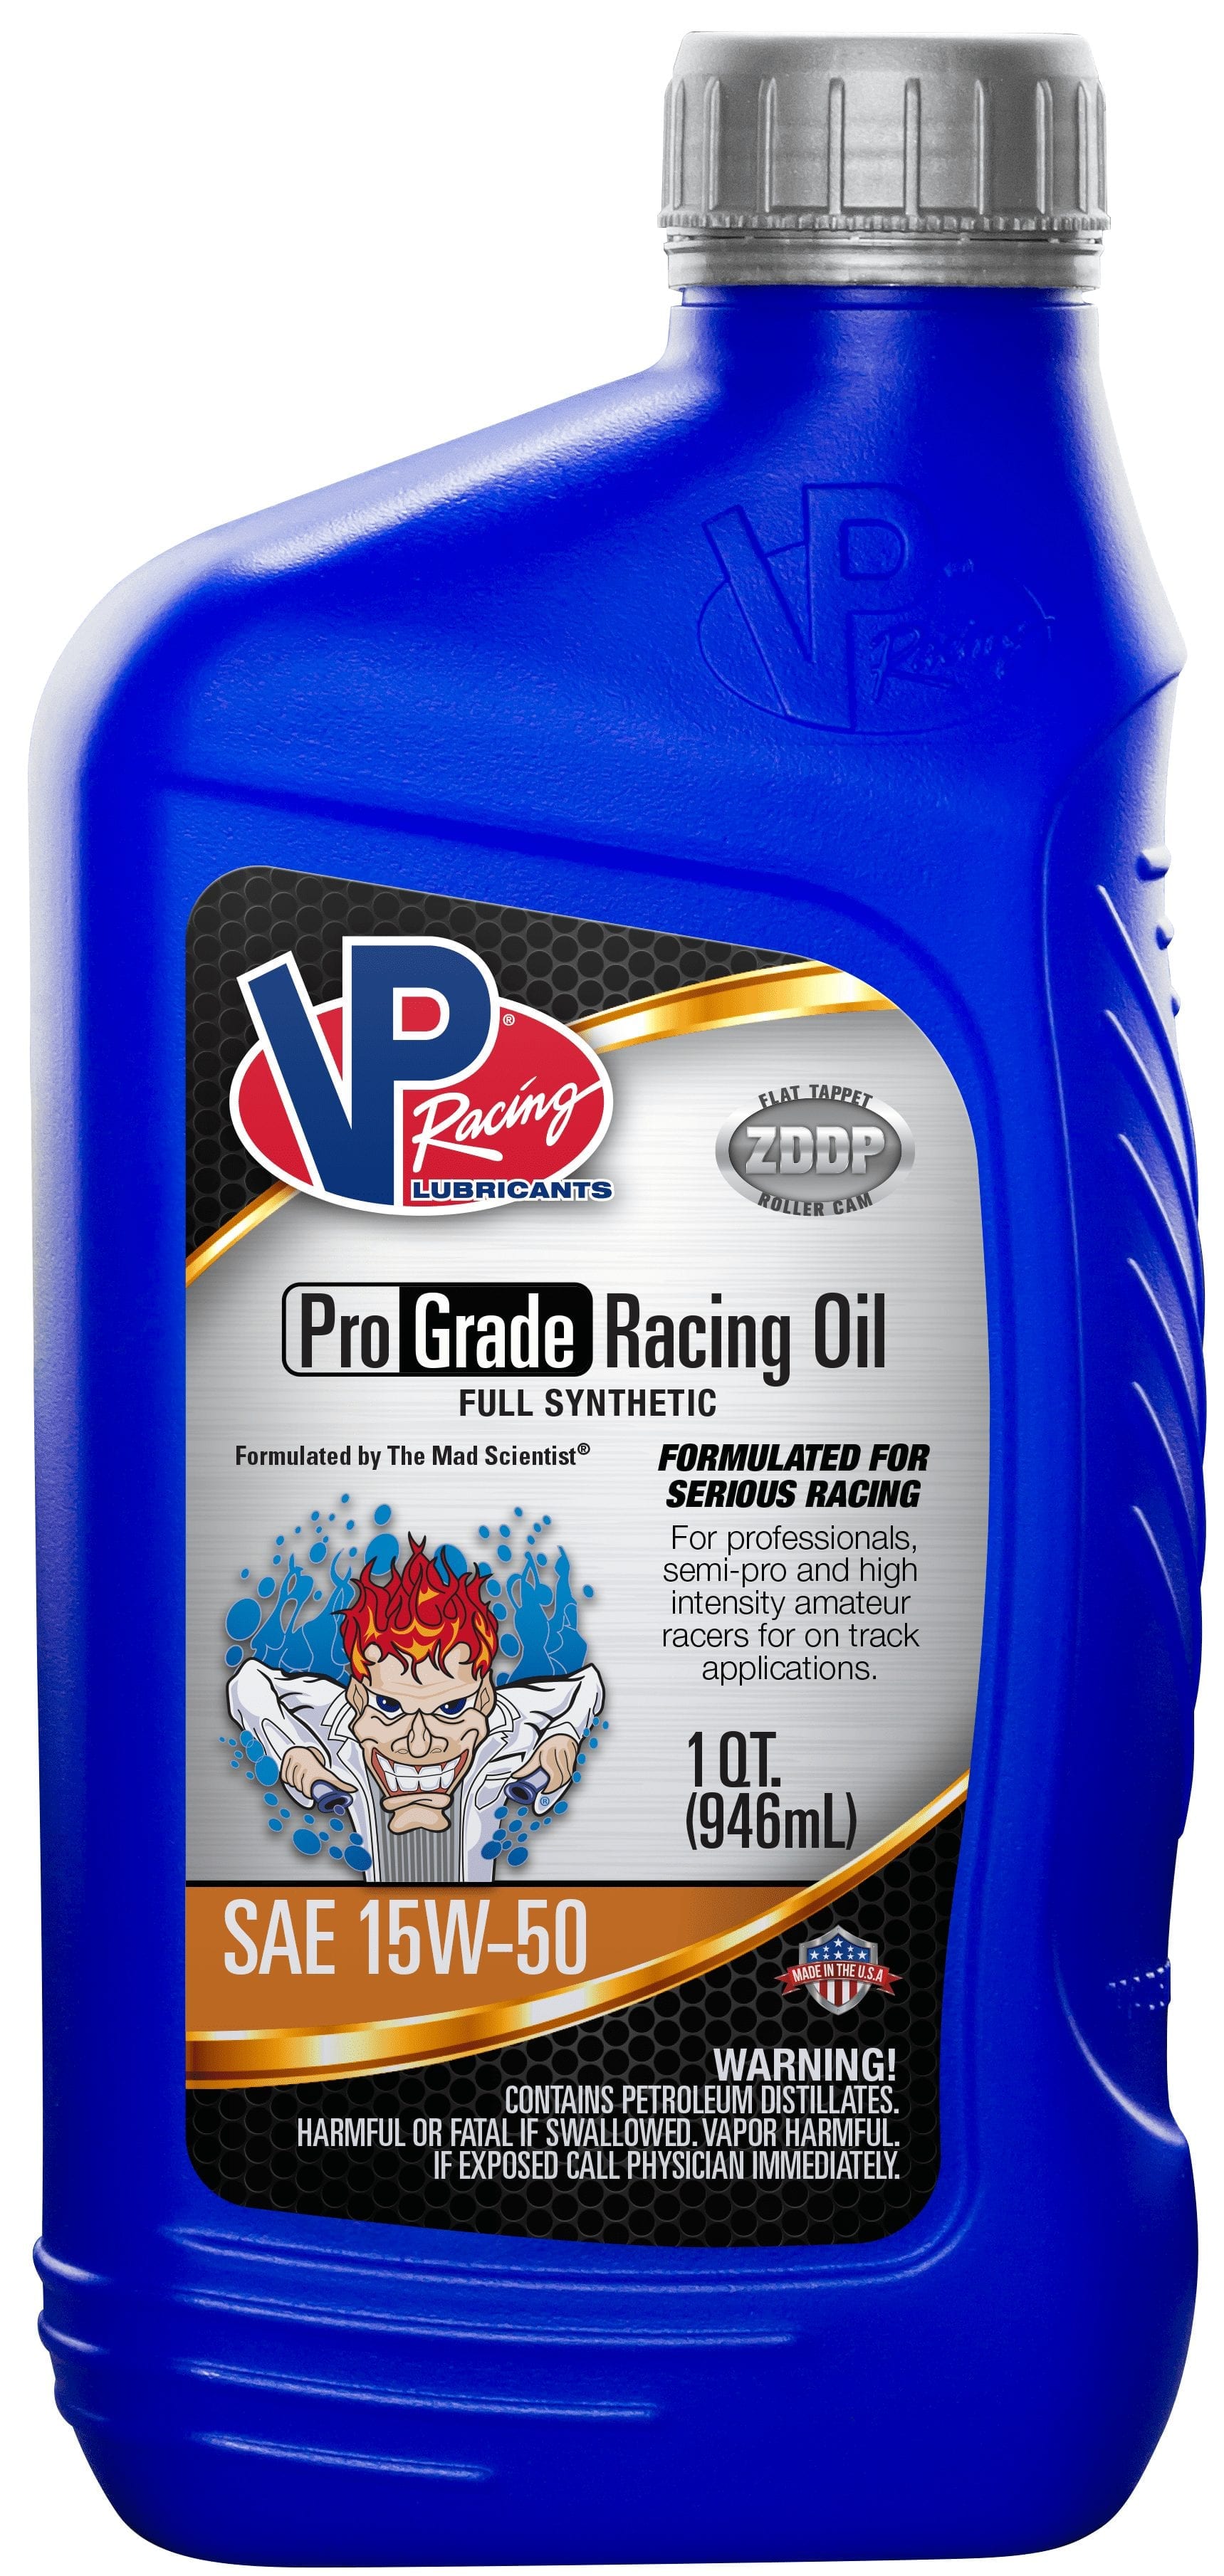 CLEMENTS RACE ENGINES FINDS RESULTS WITH VP PRO GRADE RACING OIL